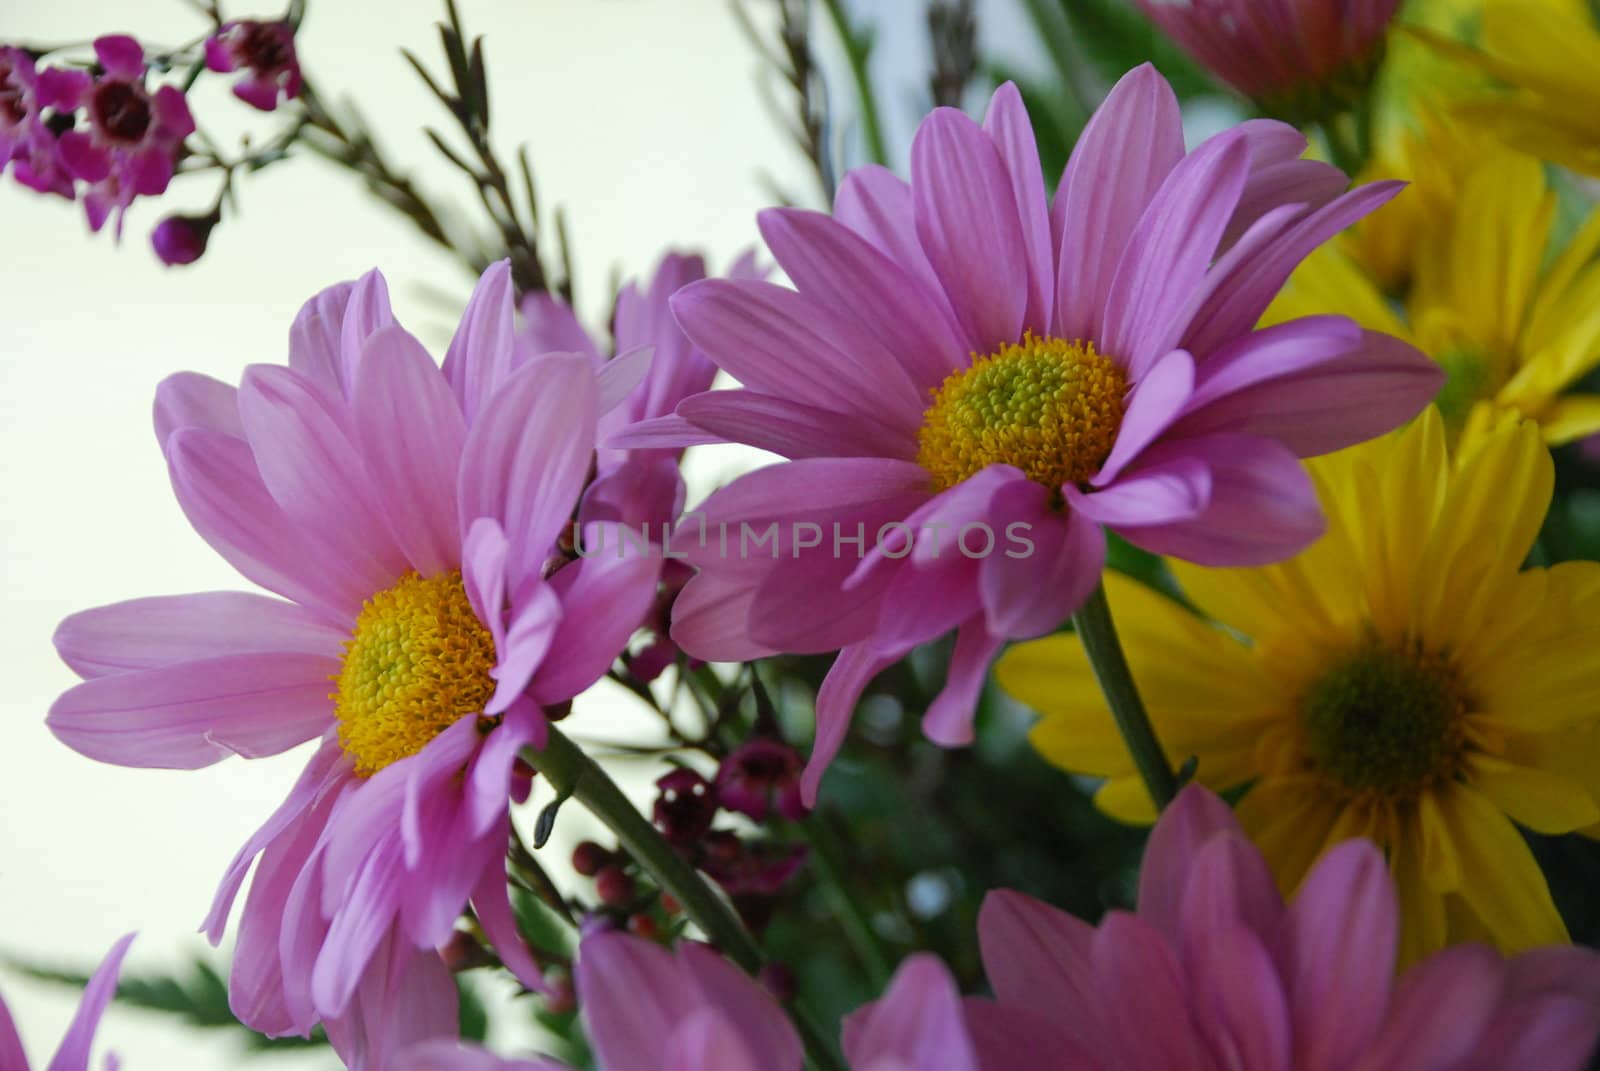 Pink Daisies in a bouquet